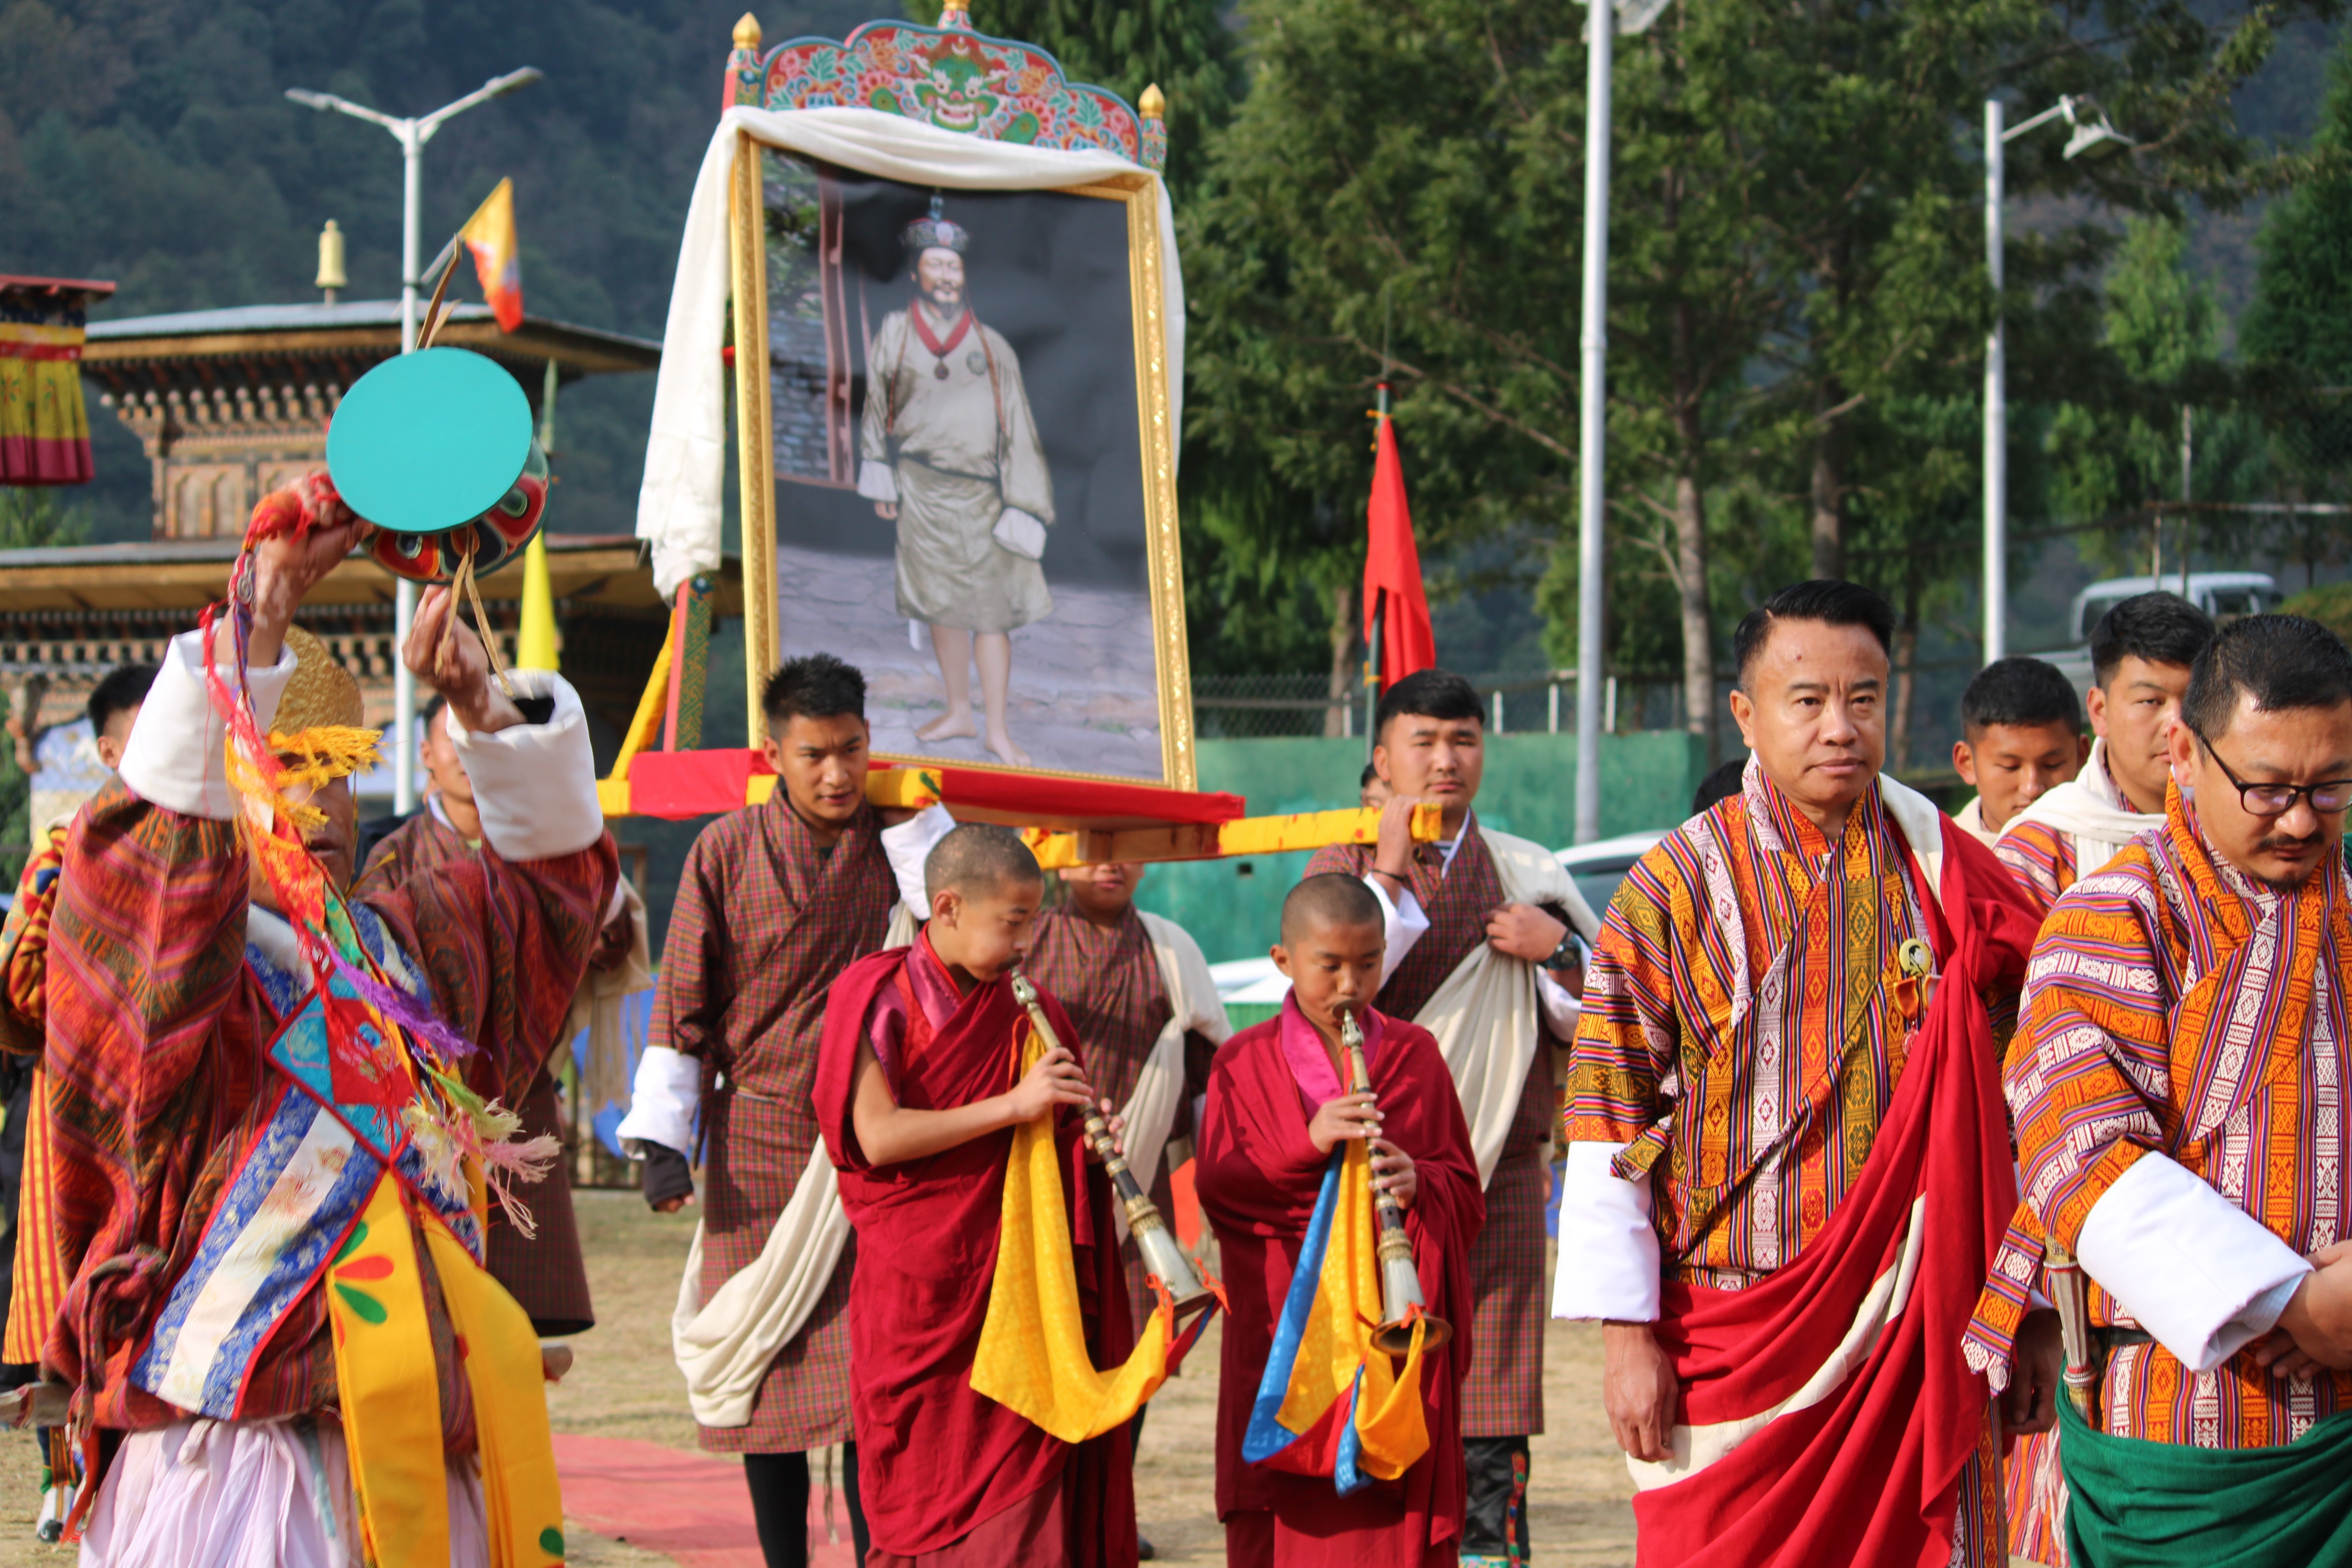 On The Auspicious And Joyous Occasion Of 115th National Day, The Public, Civil Servants And The Dratshang  Rabdey of Trashi Yangtse Dzongkhag Joins The Nation To Celebrate And  Offer Our Solemn Prayers For Continued Peace, Prosperity and Harmony under the Wangchuck Dynasty And Re-Dedicate Ourselves To The  Service Of The Tsa-Wa-Sum.   Trashi Yangtse Dzongkhag Joins The Nation To Celebrate The 115th National Day On 17th December 2022